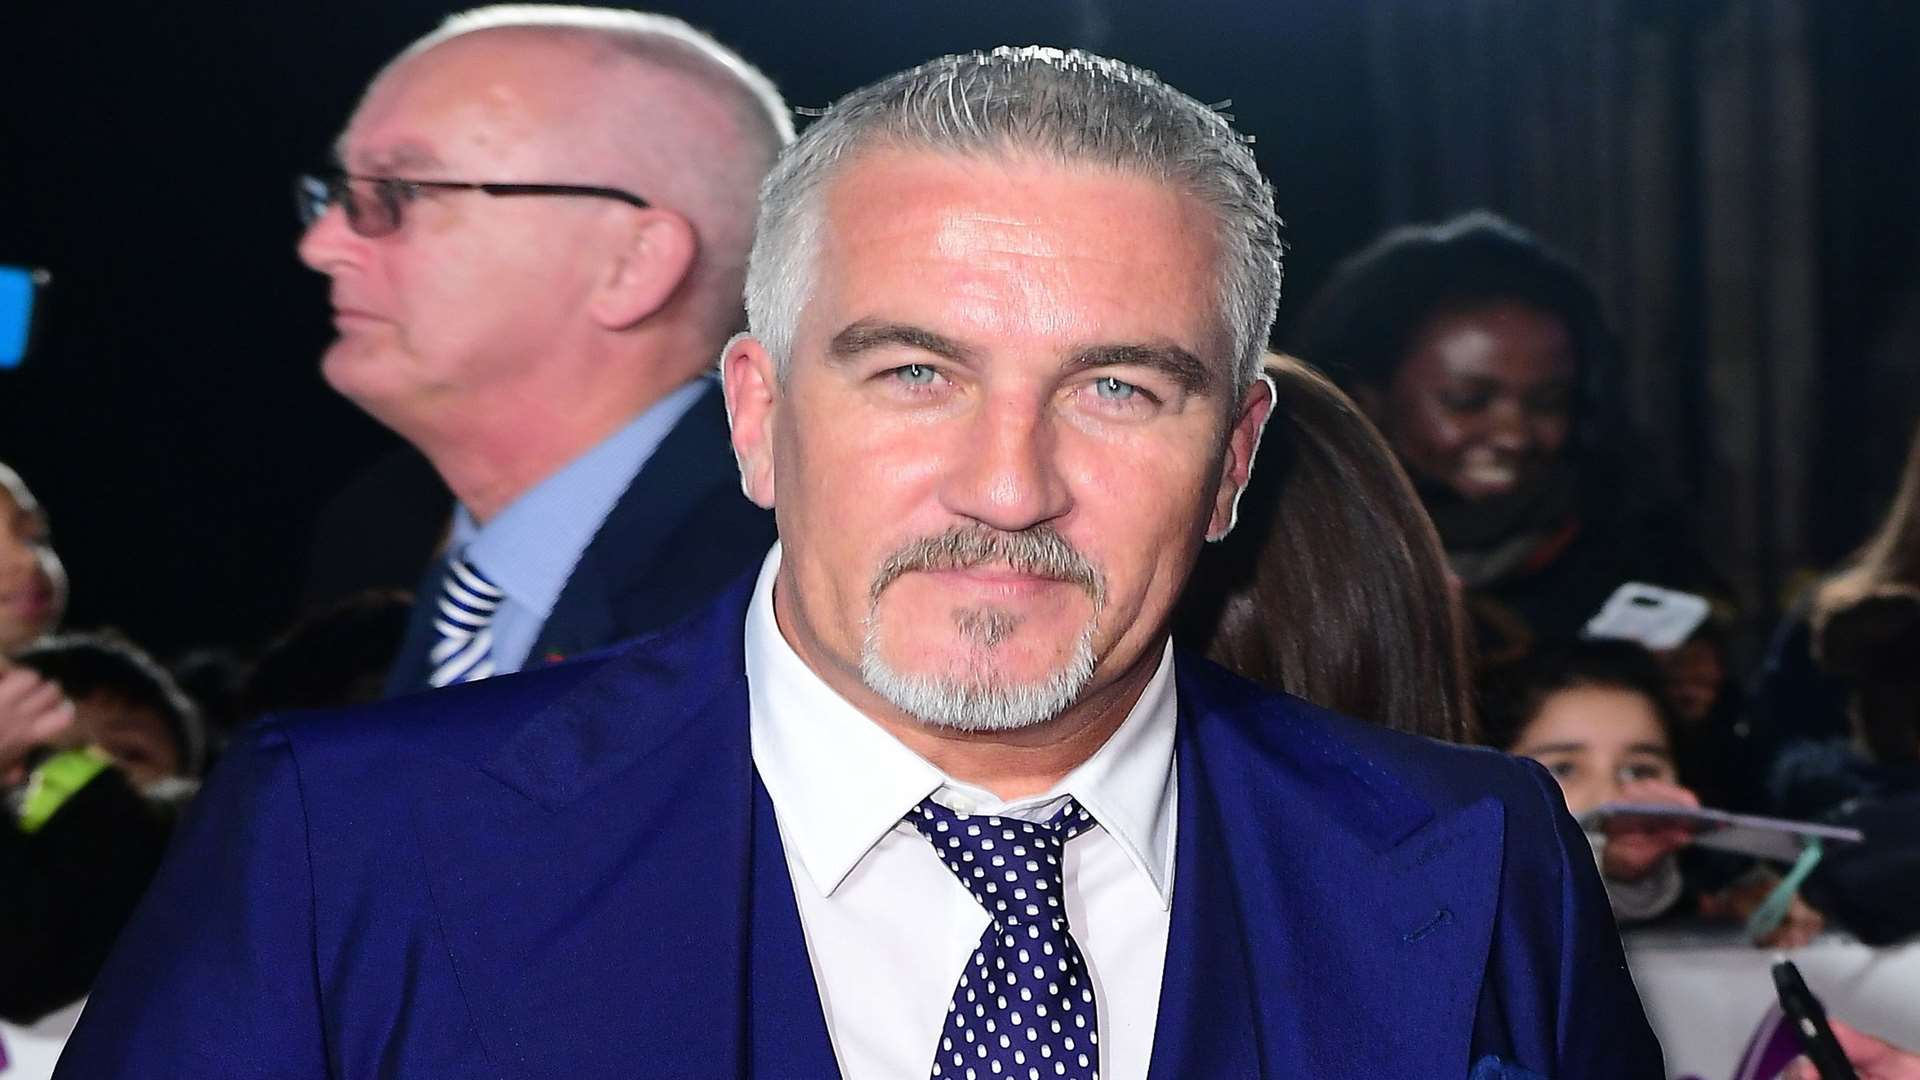 Bake off judge Paul Hollywood talks about his life and career on Channel 4